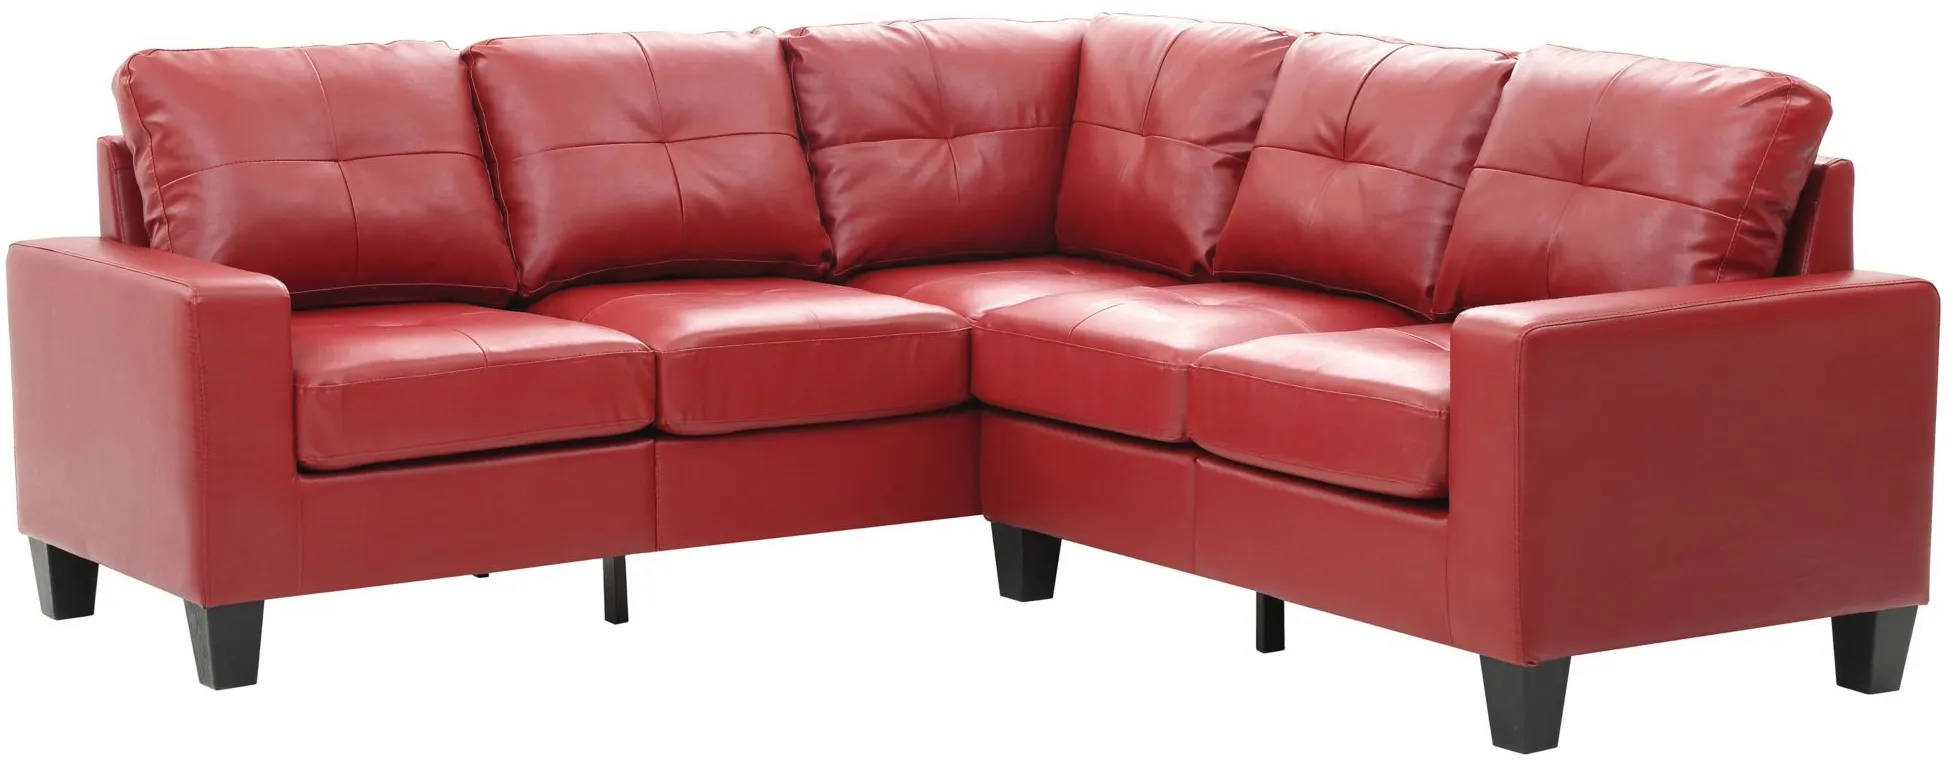 Newbury Sectional Sofa in Red by Glory Furniture